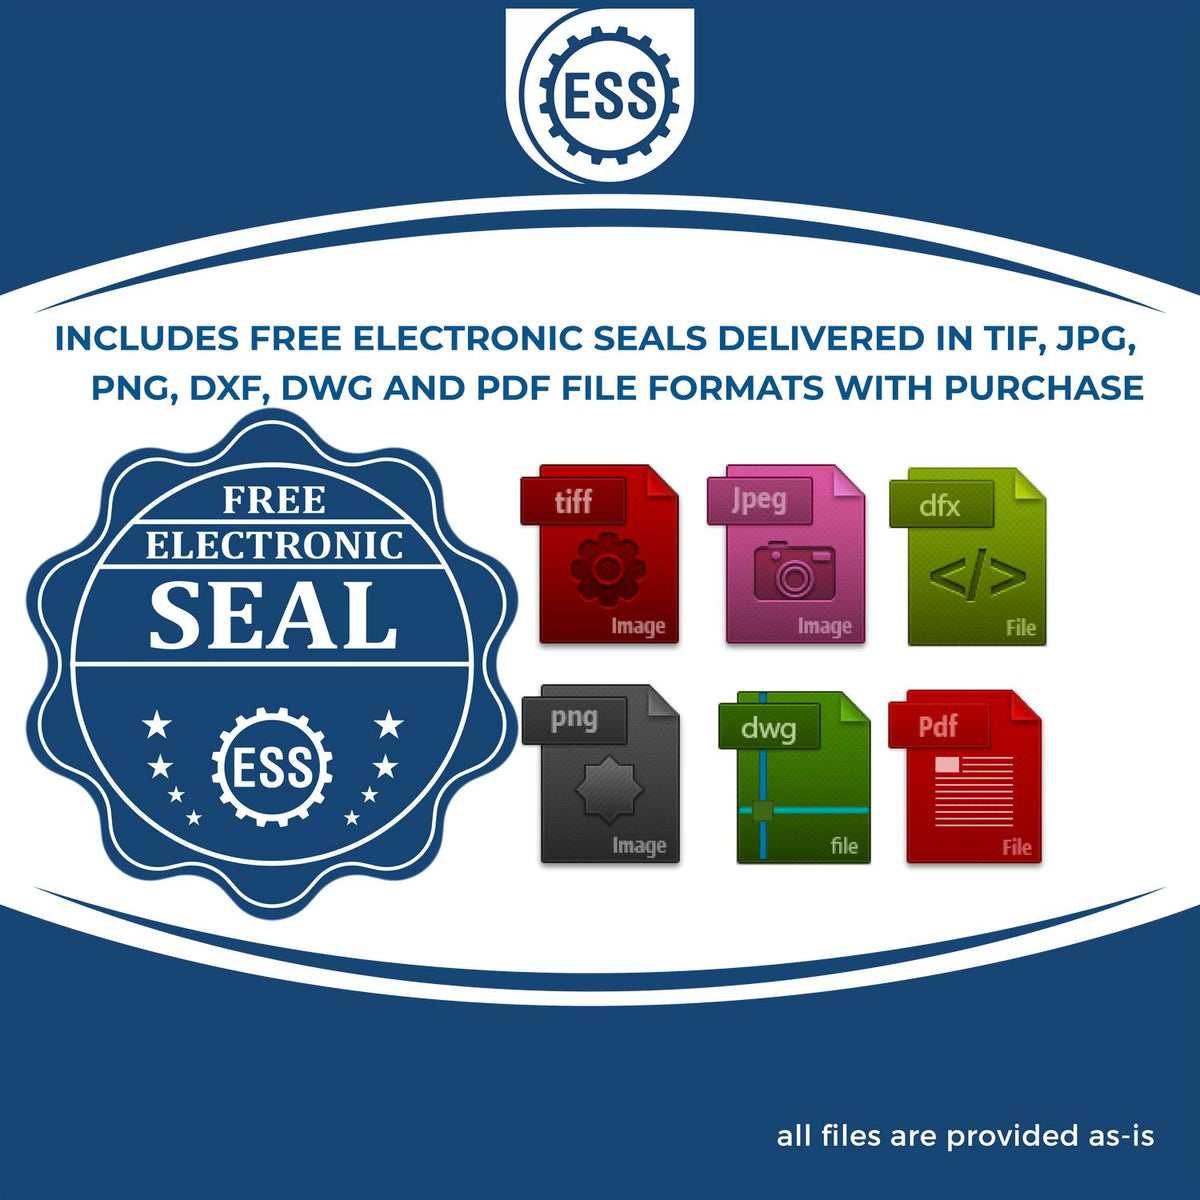 An infographic for the free electronic seal for the Hawaii Engineer Desk Seal illustrating the different file type icons such as DXF, DWG, TIF, JPG and PNG.